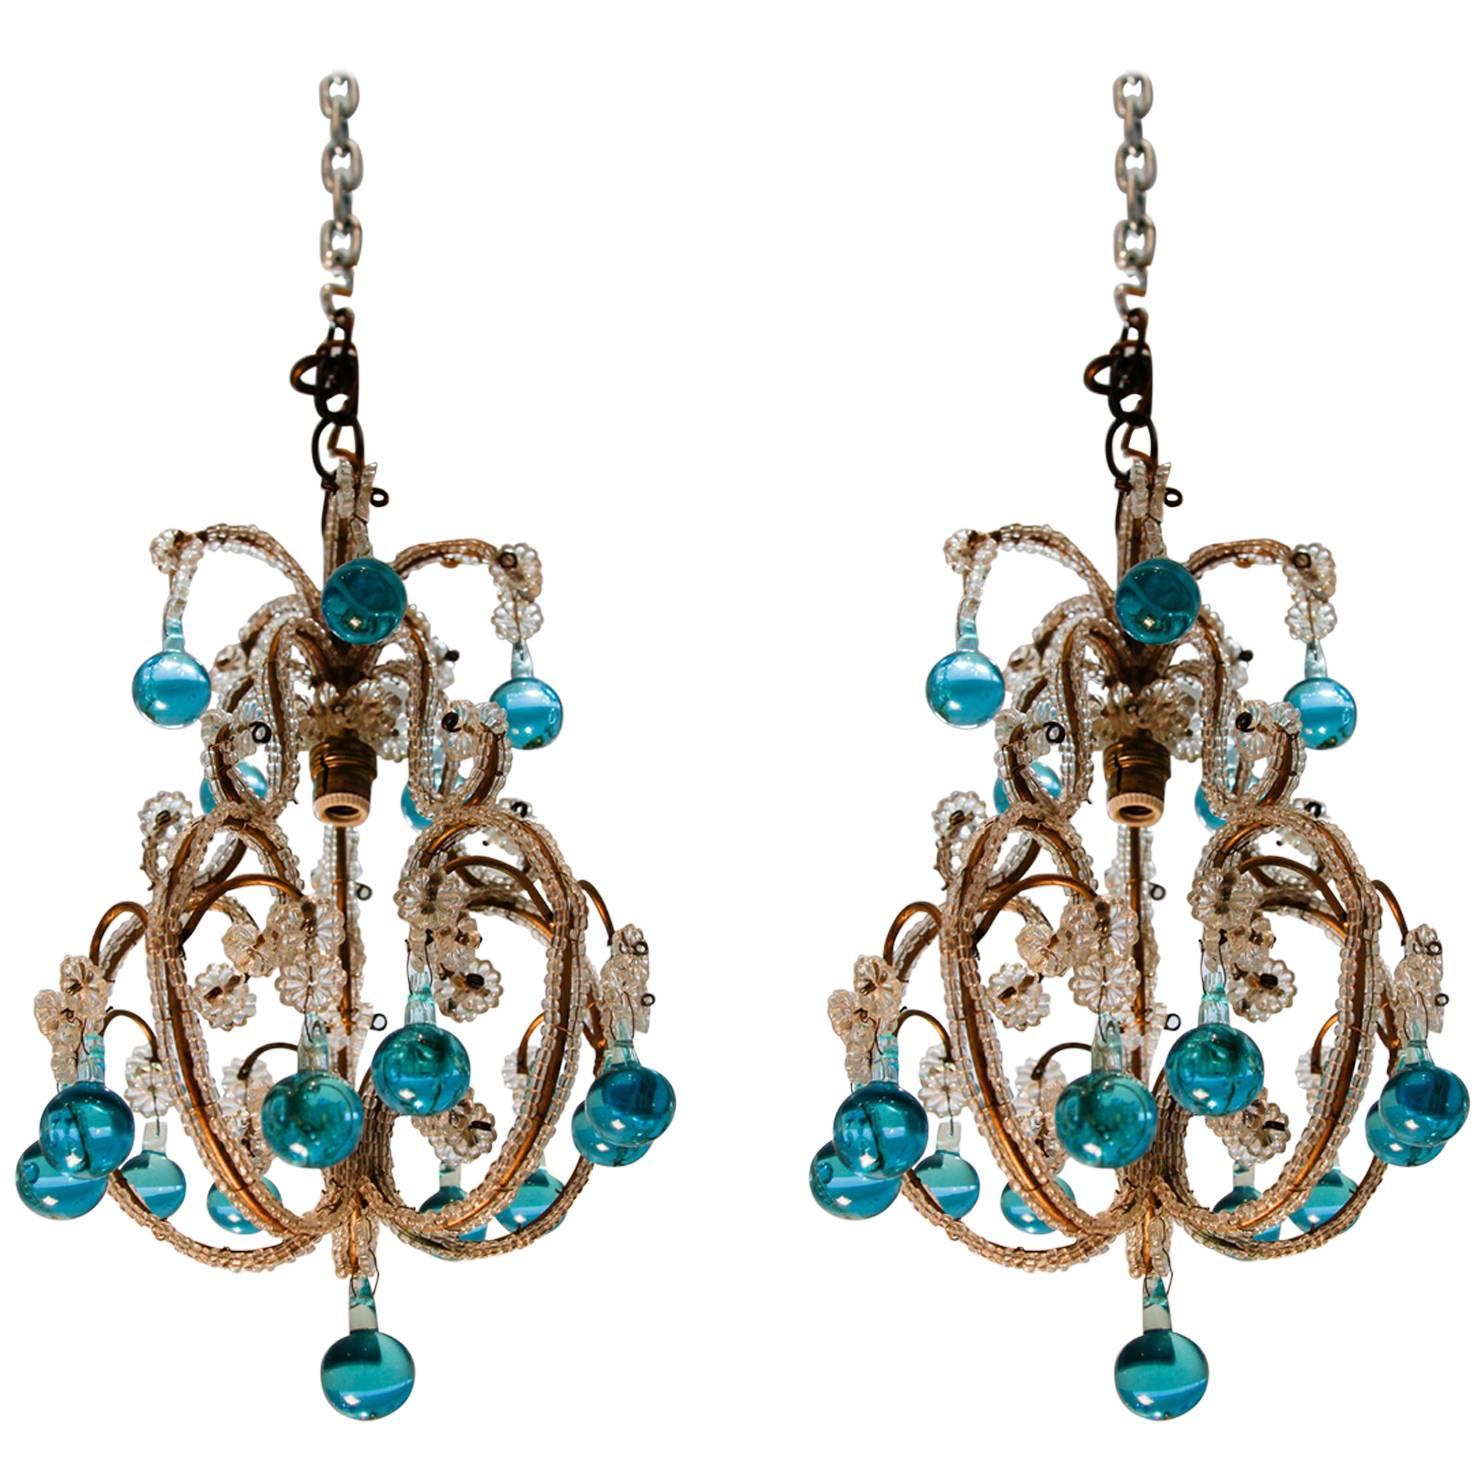 Pair of Vintage Petite Blue Beaded Murano Glass Chandeliers For Sale